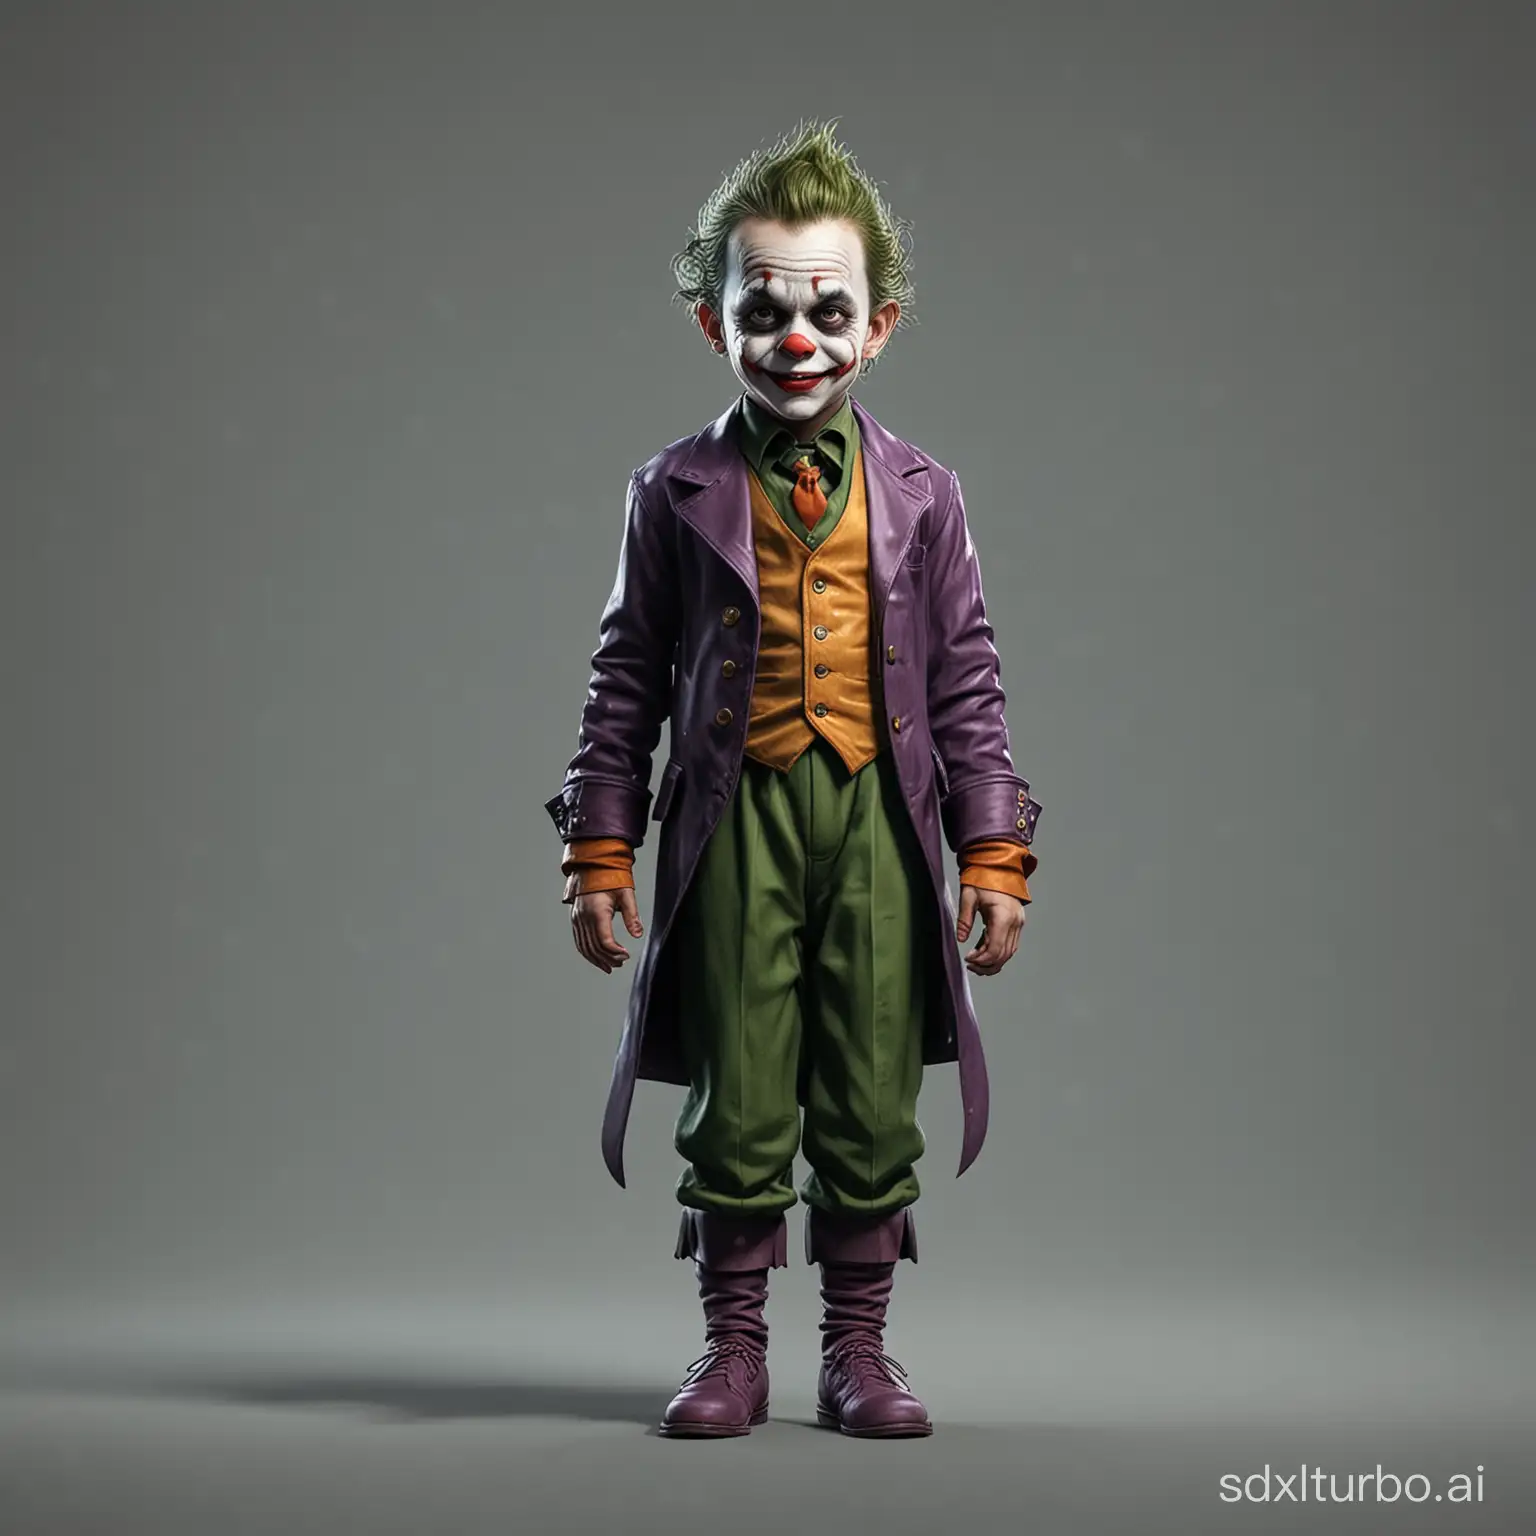 Little child joker, game character, stands at full height